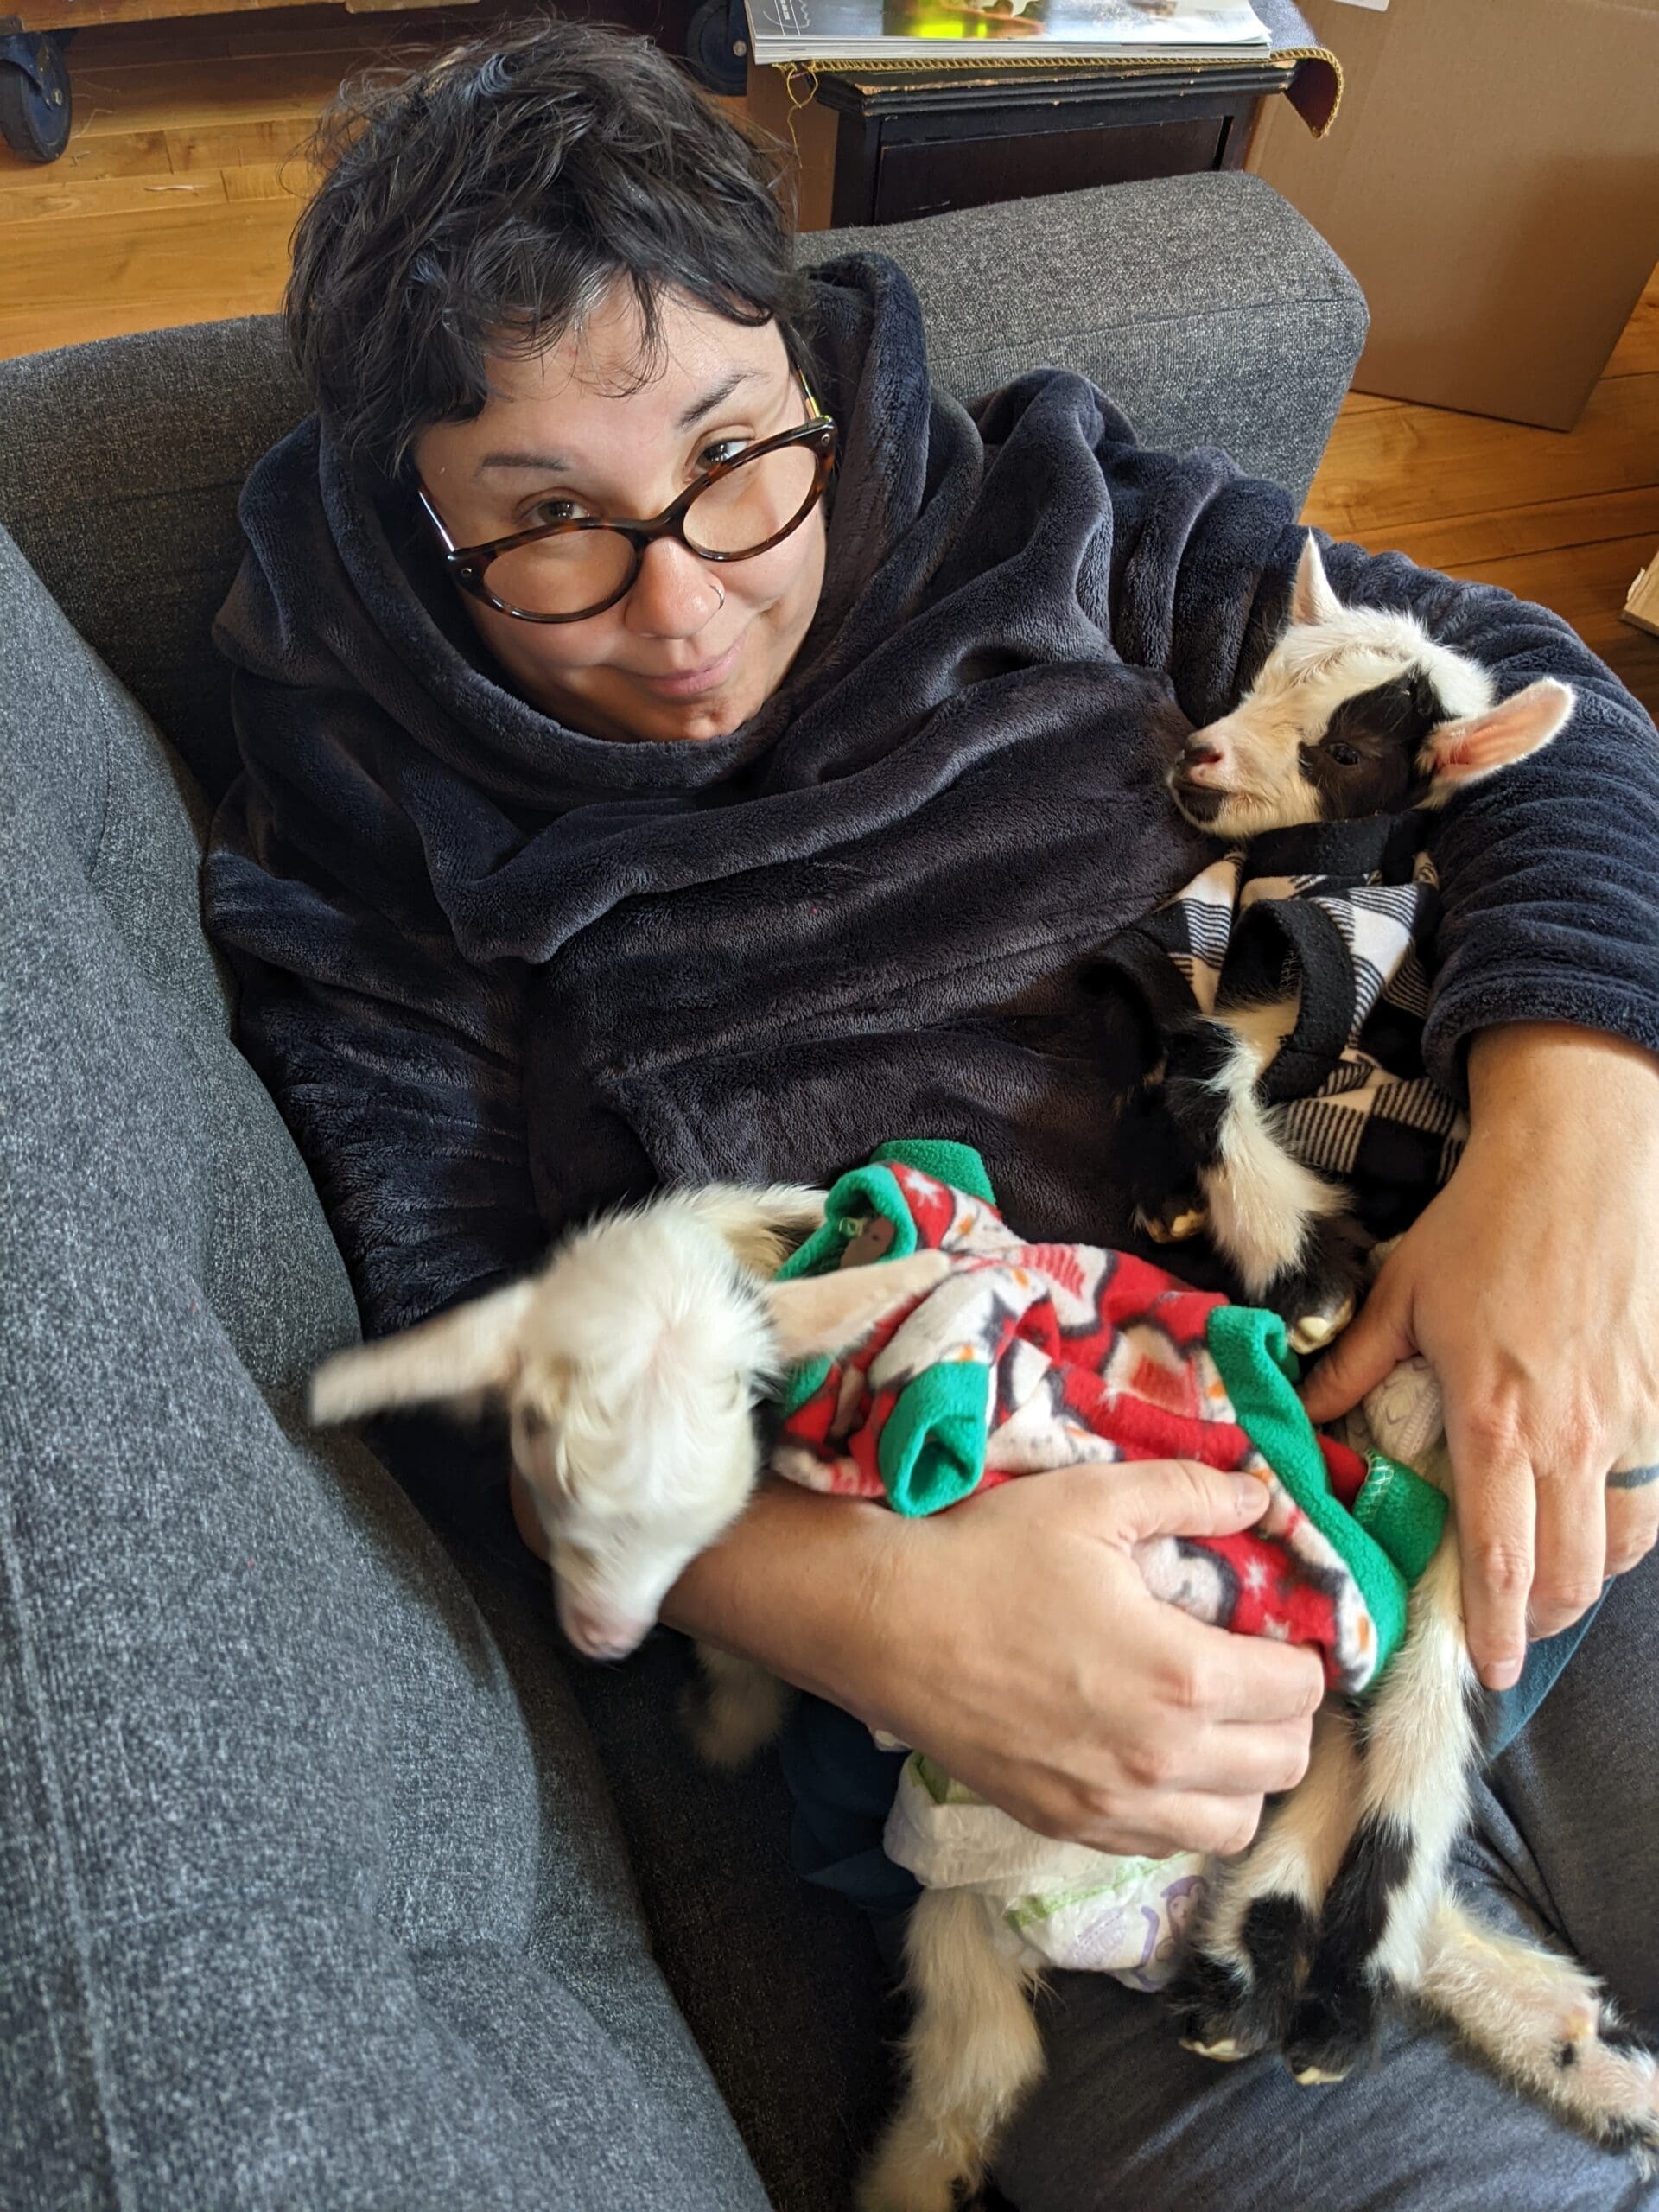 Woman reclining on couch holding two baby goats in diapers and sweaters